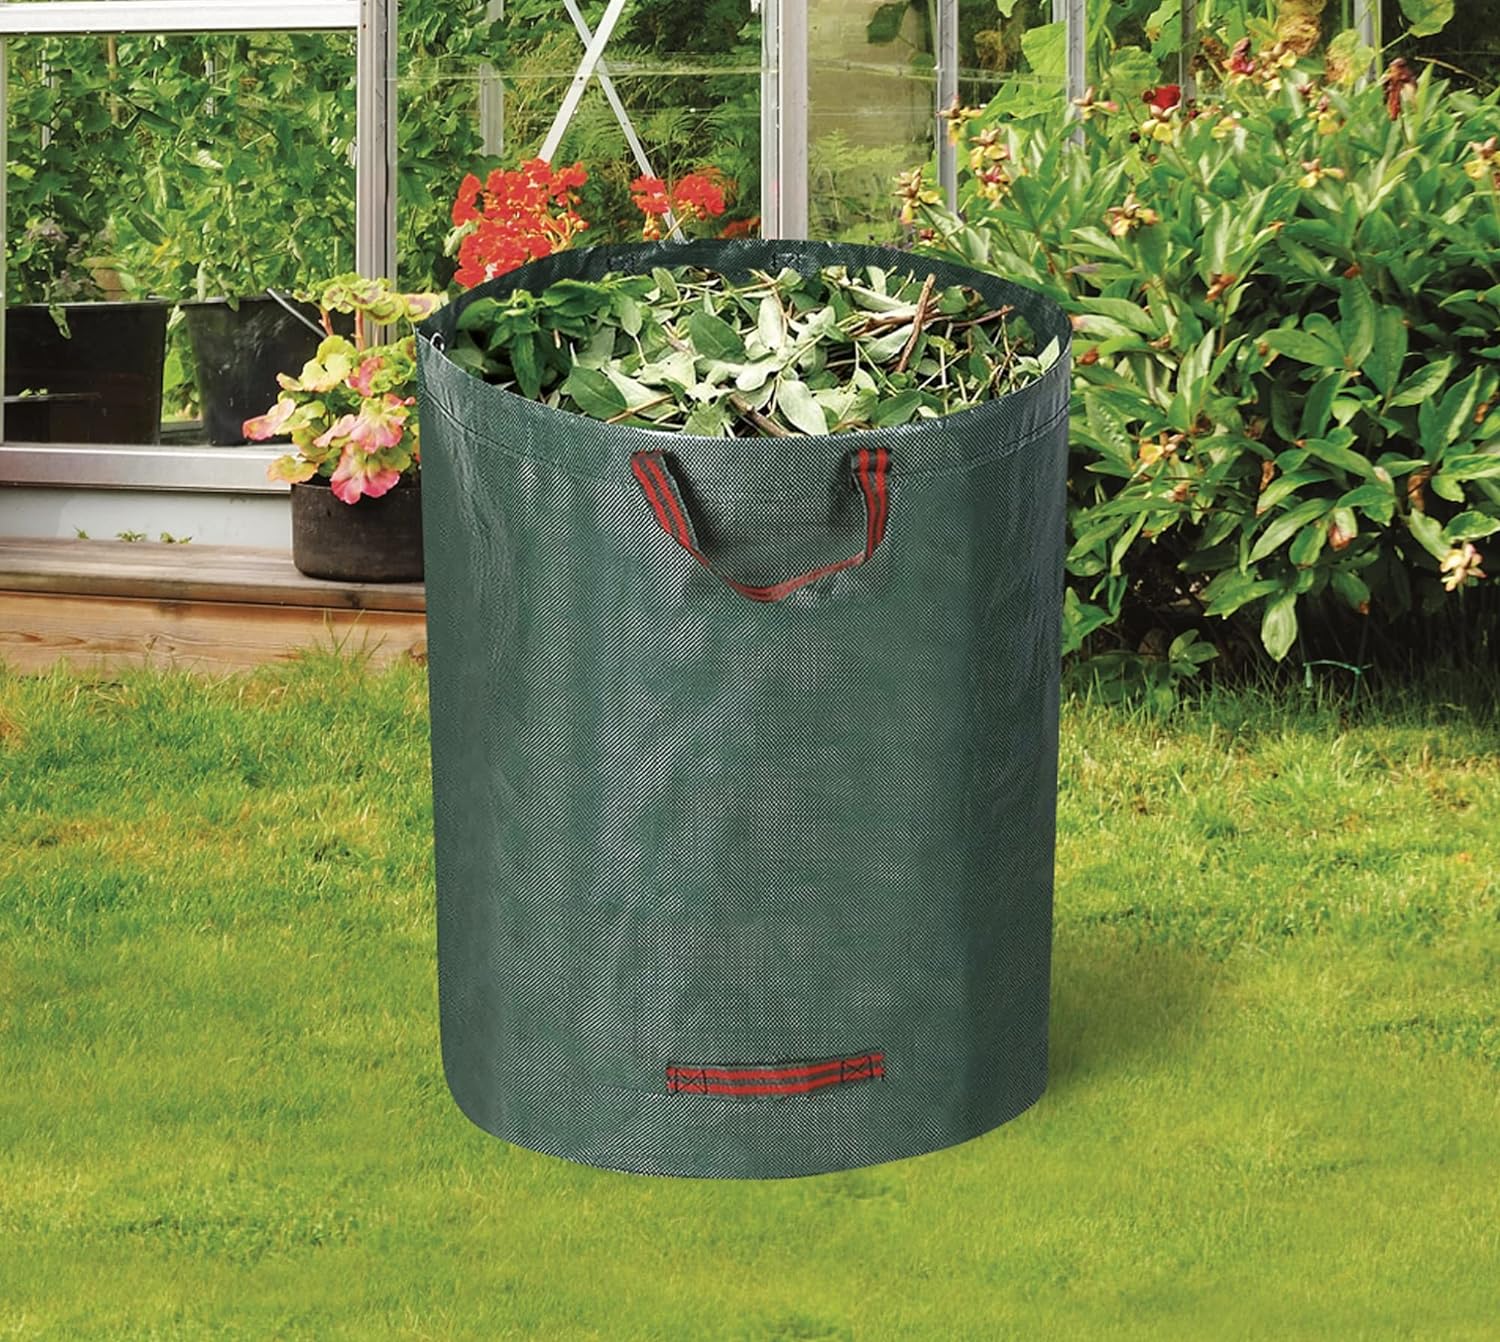 ADEPTNA Reusable Heavy Duty Garden Bag Waste Rubbish Grass Sack Waterproof Large with 4 Strong Webbing Handles (300L Capacity)